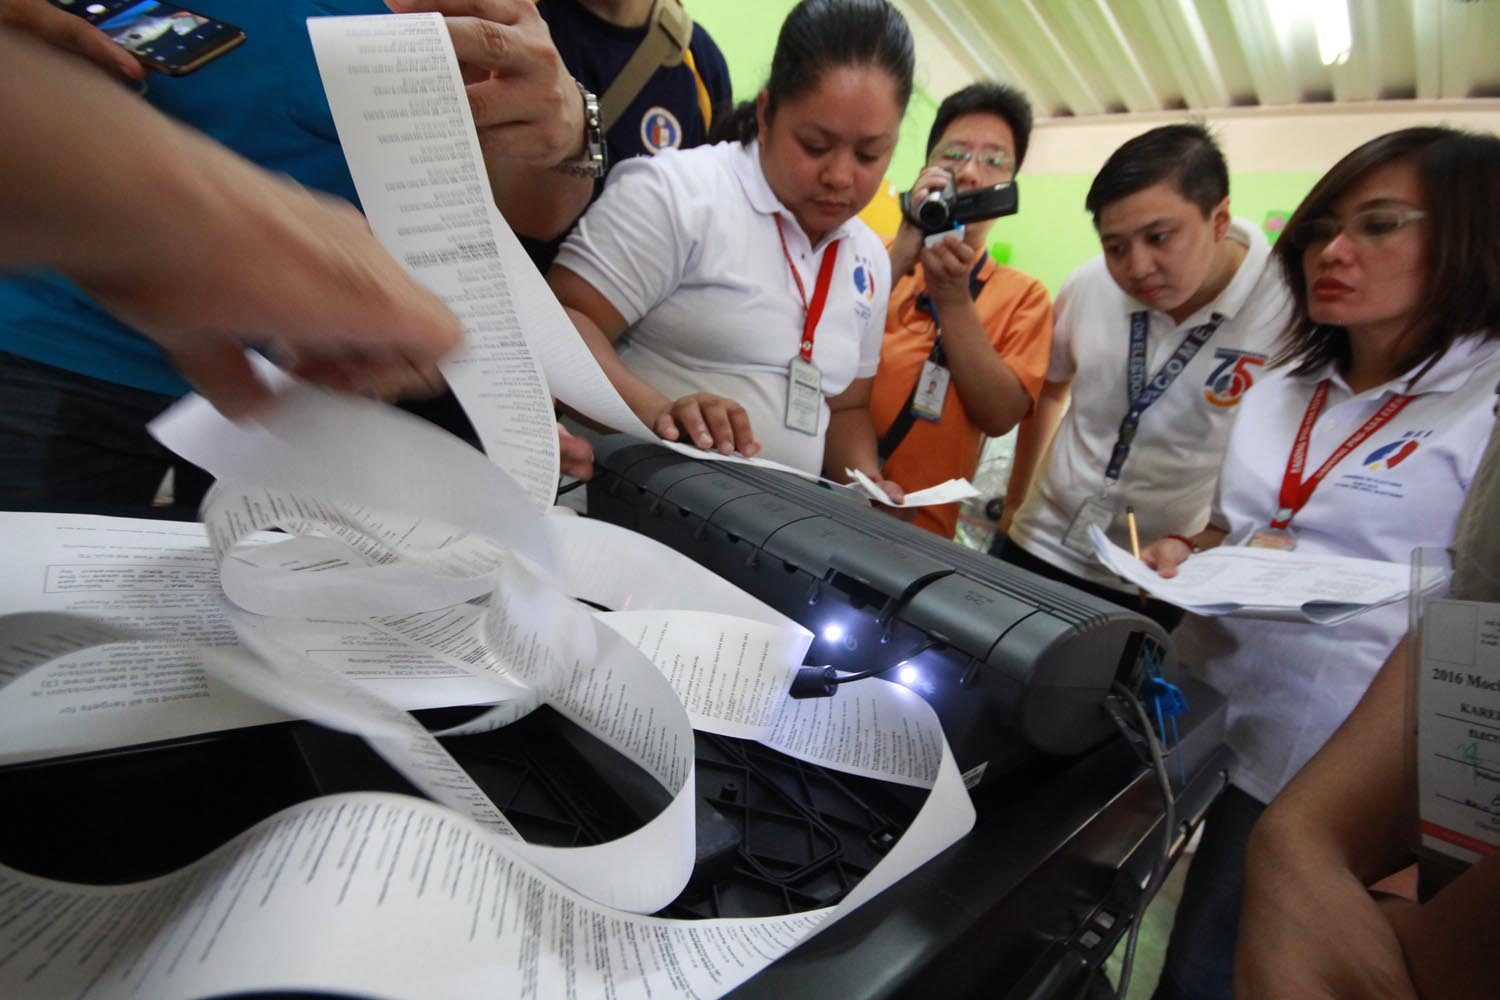 HOW IT WORKS. The Board of Election Inspectors shows representatives of election watchdogs how the votes are transmitted from the precinct-based machines during the mock elections in Bagong Pag-asa Elementary School in Quezon City. File photo by Joel Liporada/Rappler   